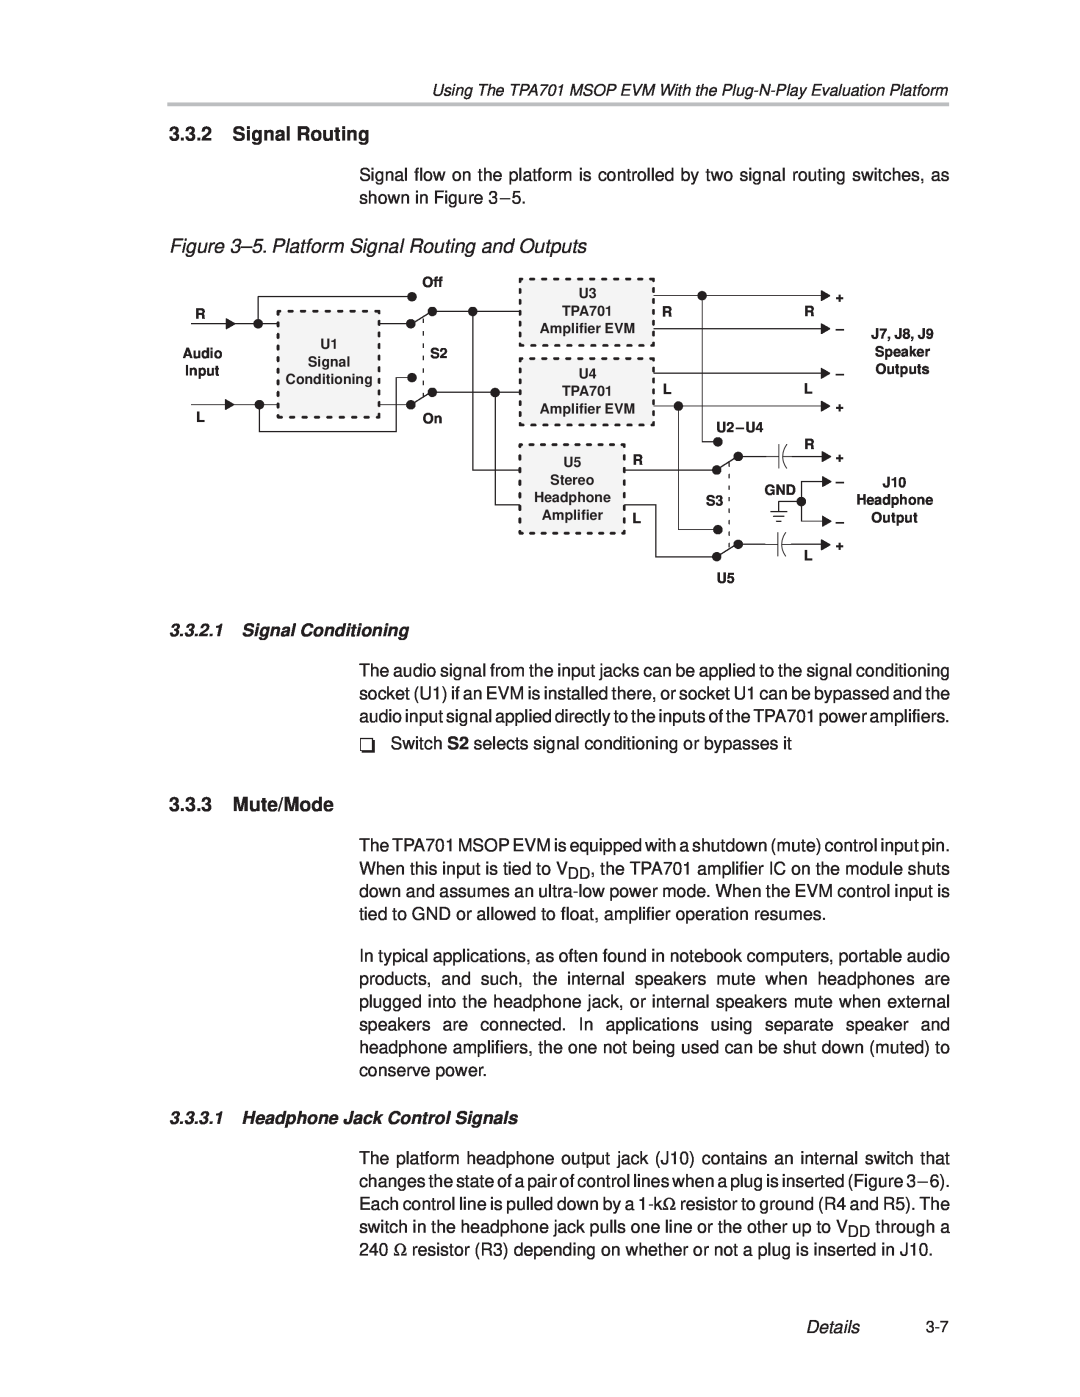 Texas Instruments TPA701 manual 3.3.2Signal Routing, ±5. Platform Signal Routing and Outputs, 3.3.3Mute/Mode, Details 